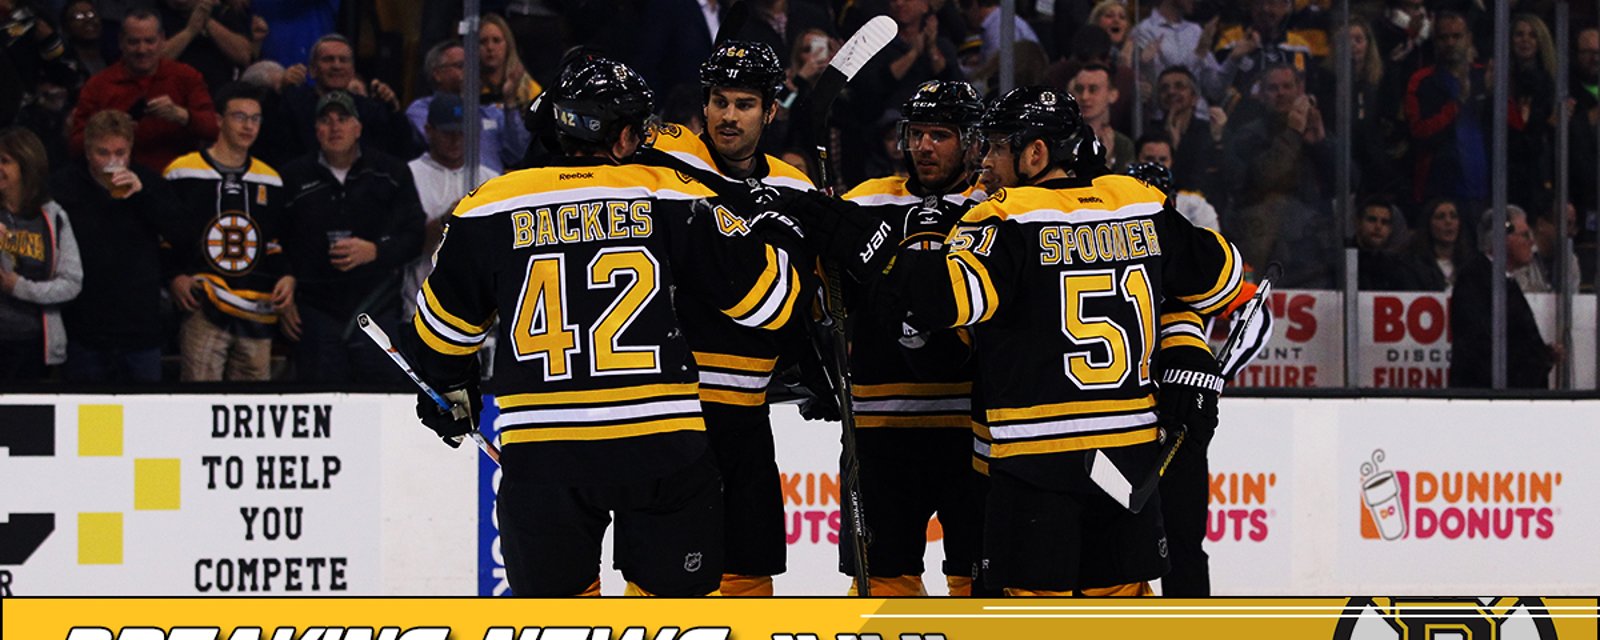 Breaking News: Bruins likely to be held without a key player for tonight's game!